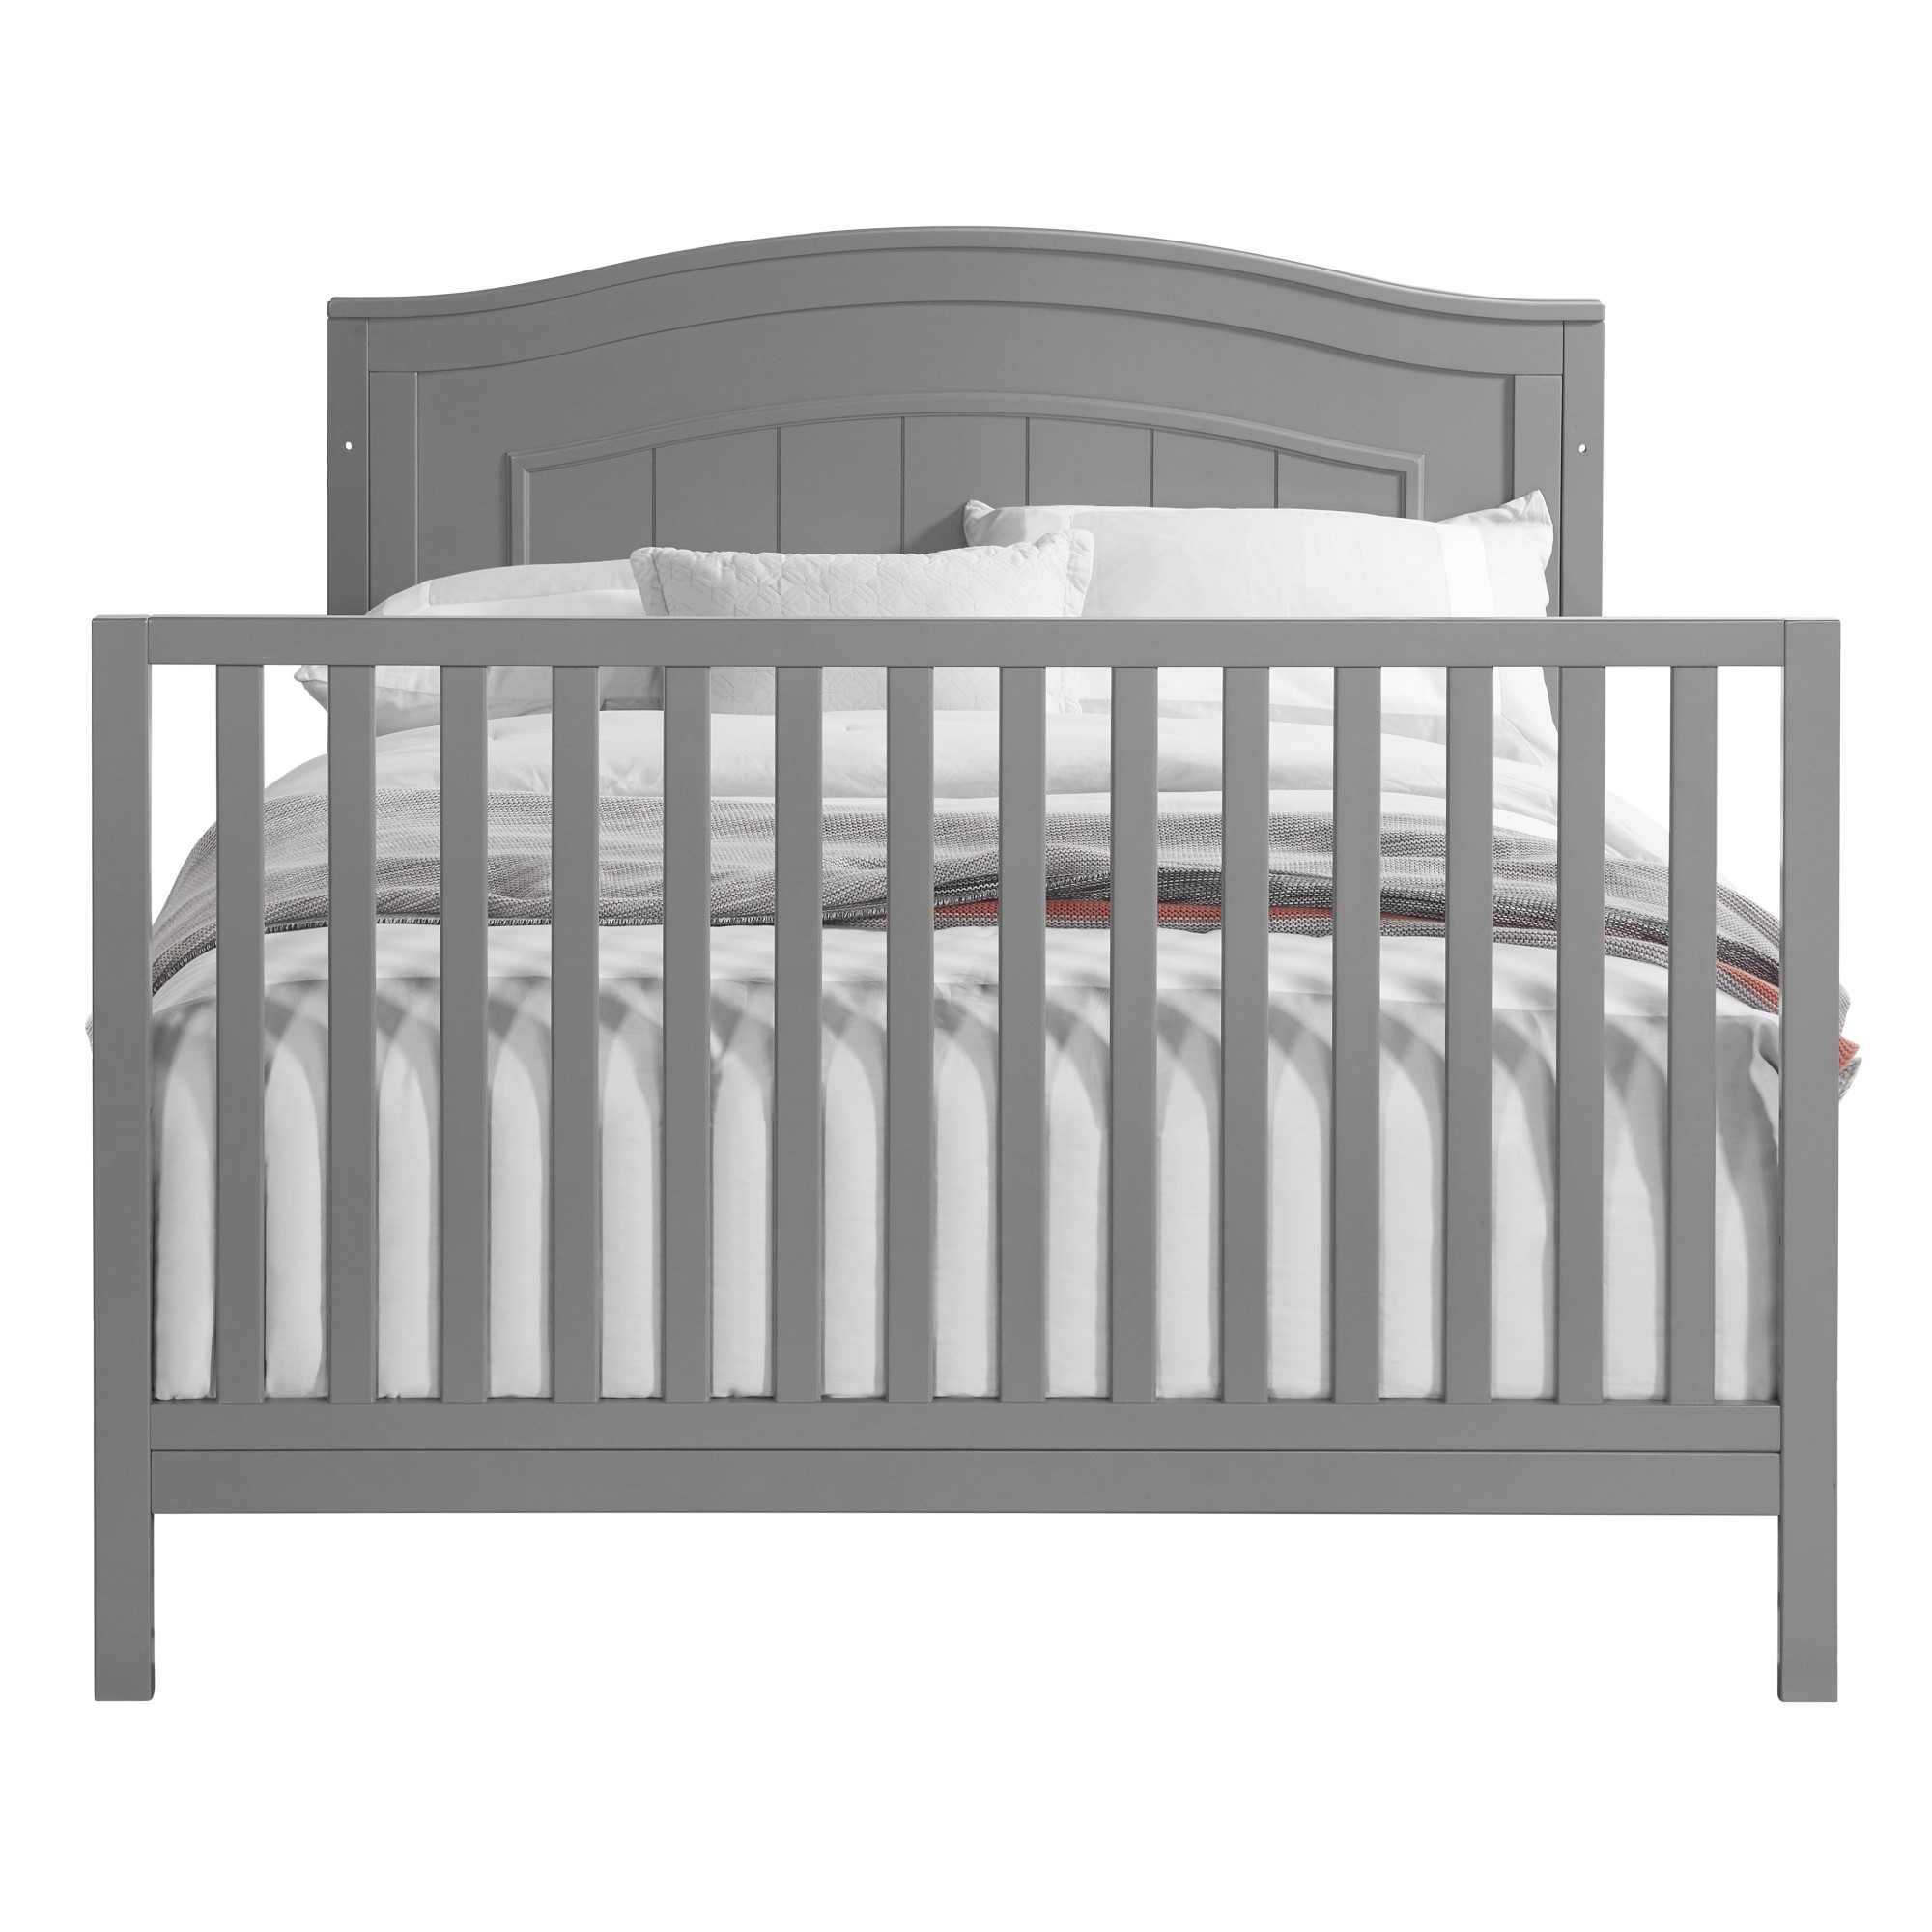 Oxford Baby North Bay 4-in-1 Convertible Crib, Dove Gray, GREENGUARD Gold Certified, Wooden Crib - image 4 of 12